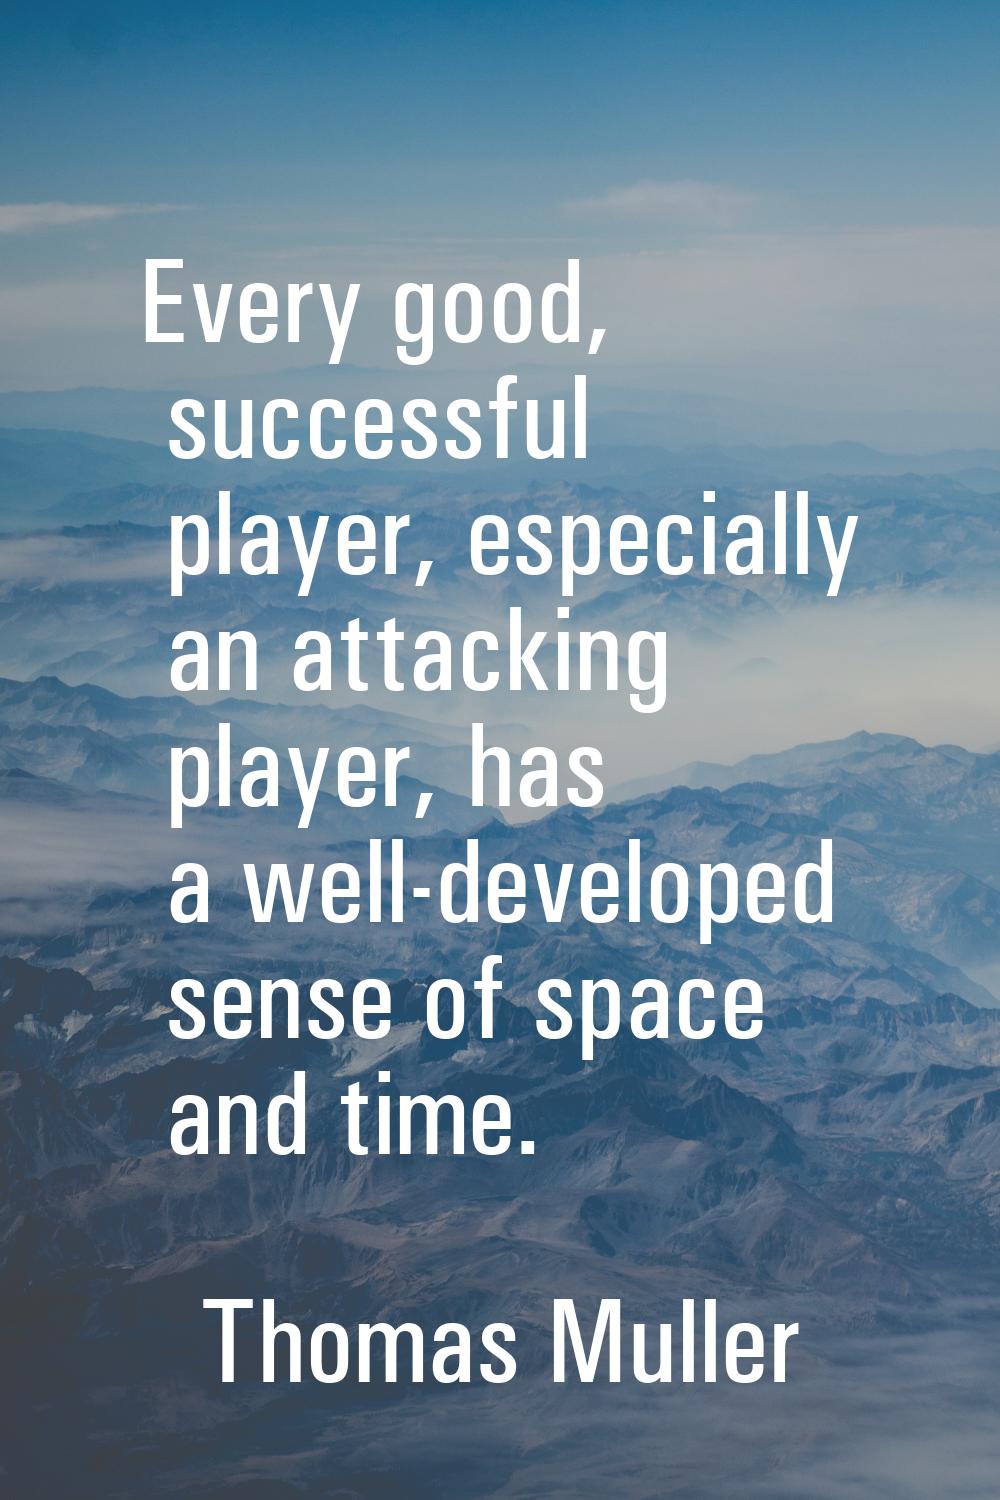 Every good, successful player, especially an attacking player, has a well-developed sense of space 